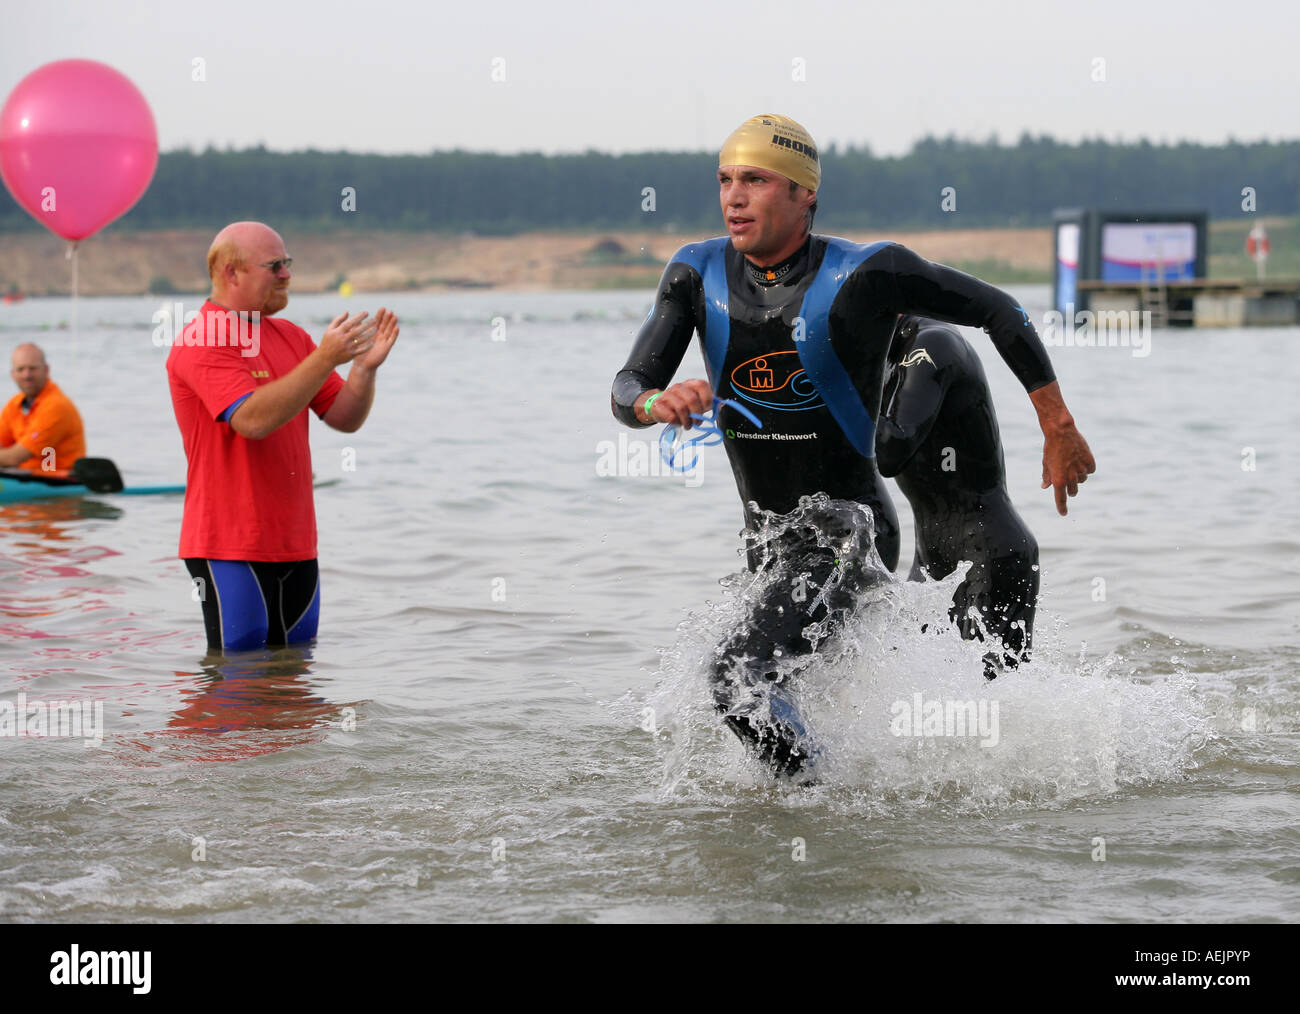 Norman Stadler at the end of the Swim course during the Ironman Europe in Frankfurt, Hesse, Germany, Europe Stock Photo